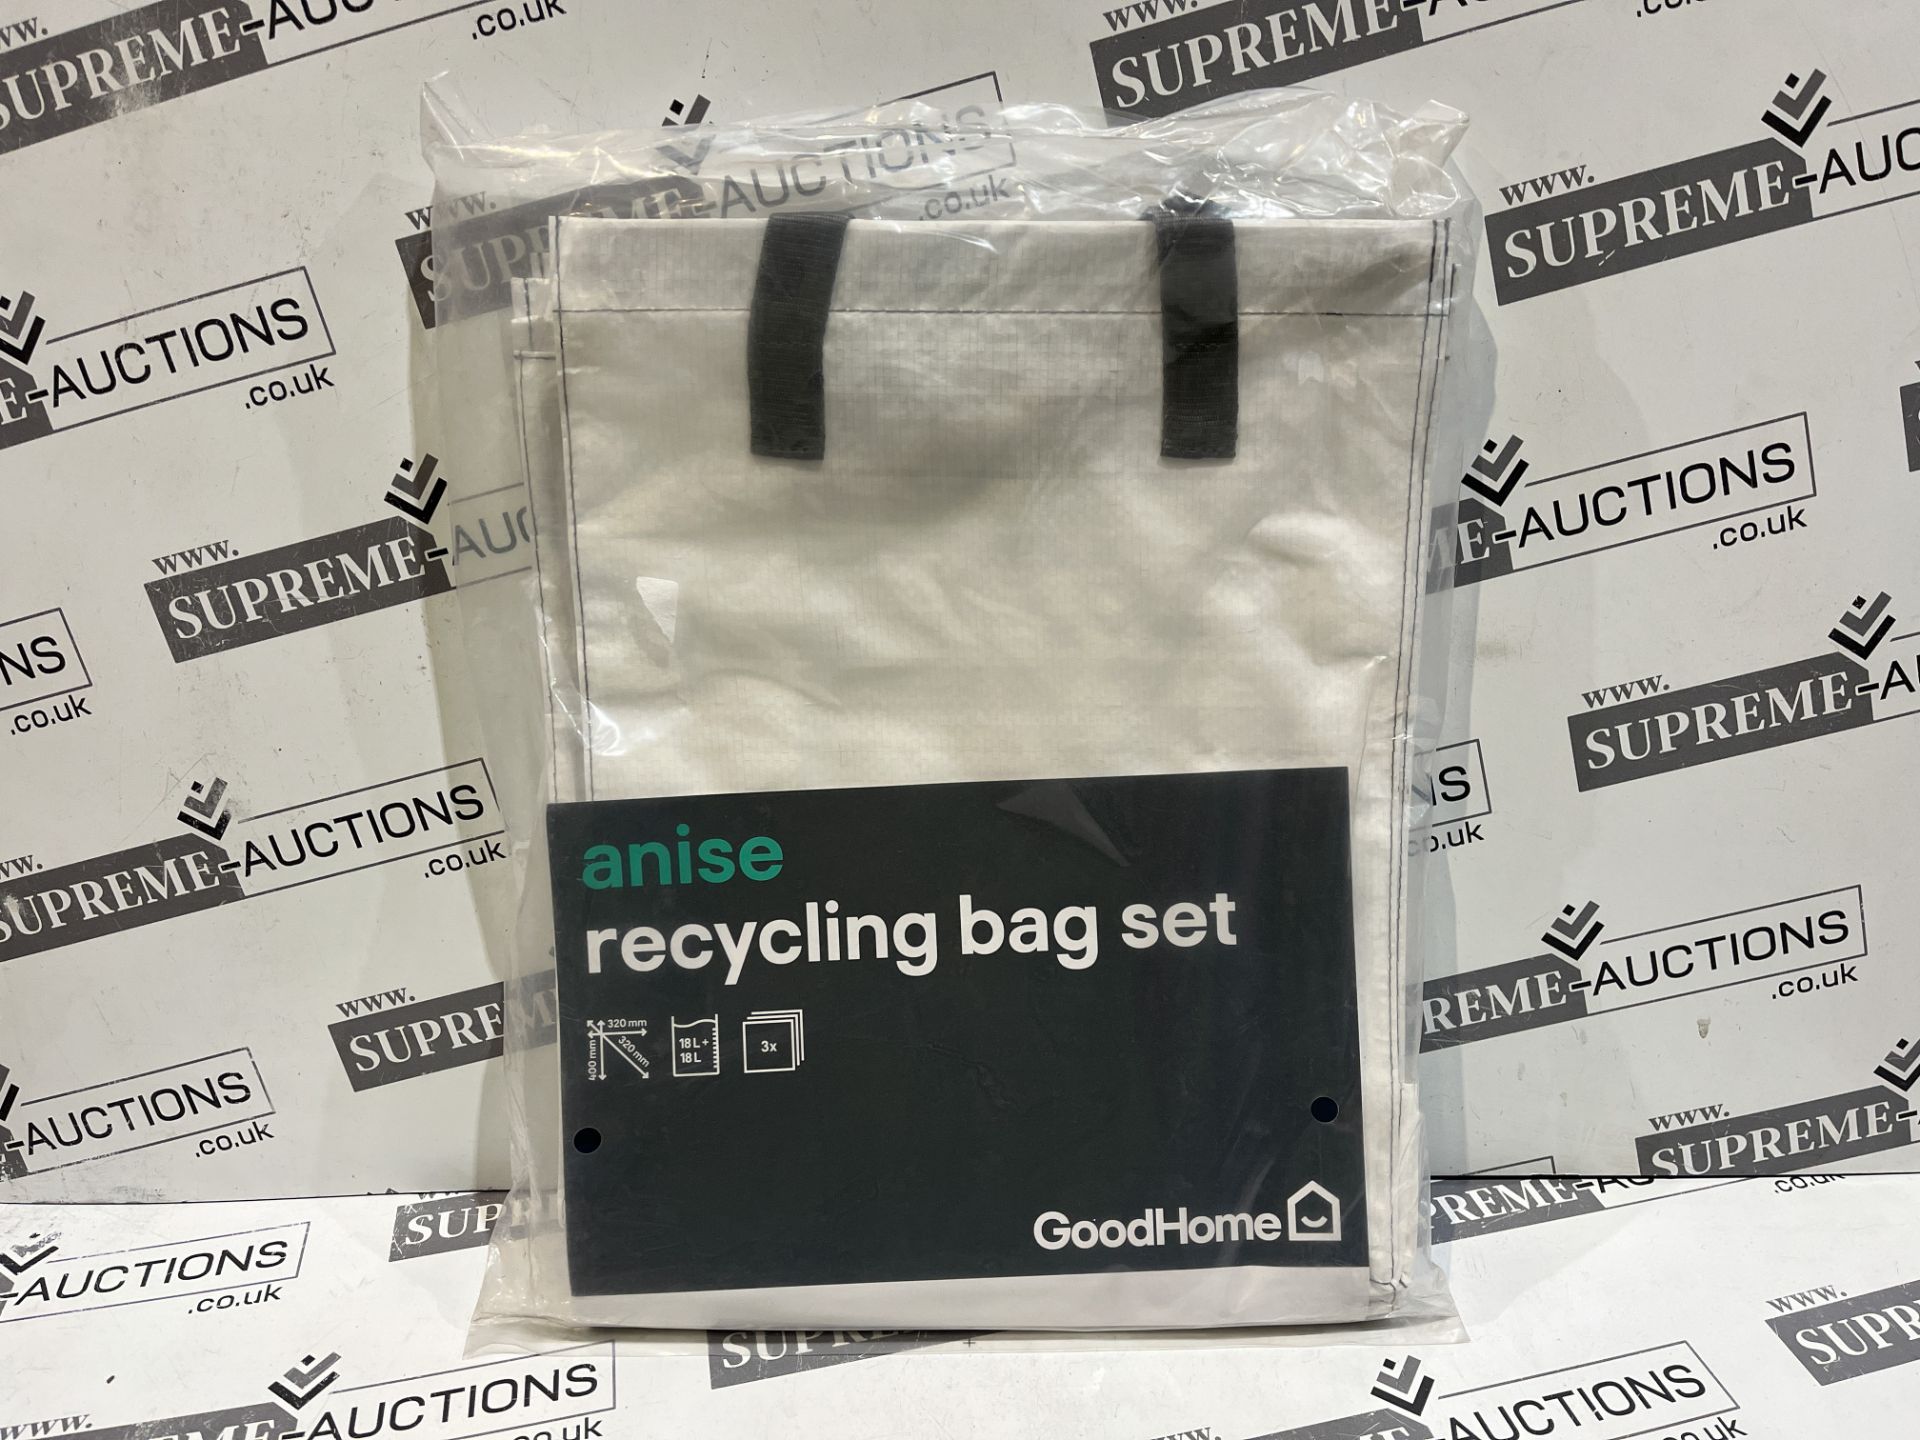 29 X BRAND NEW ANISE RECYCLING BAG SETS R9-5